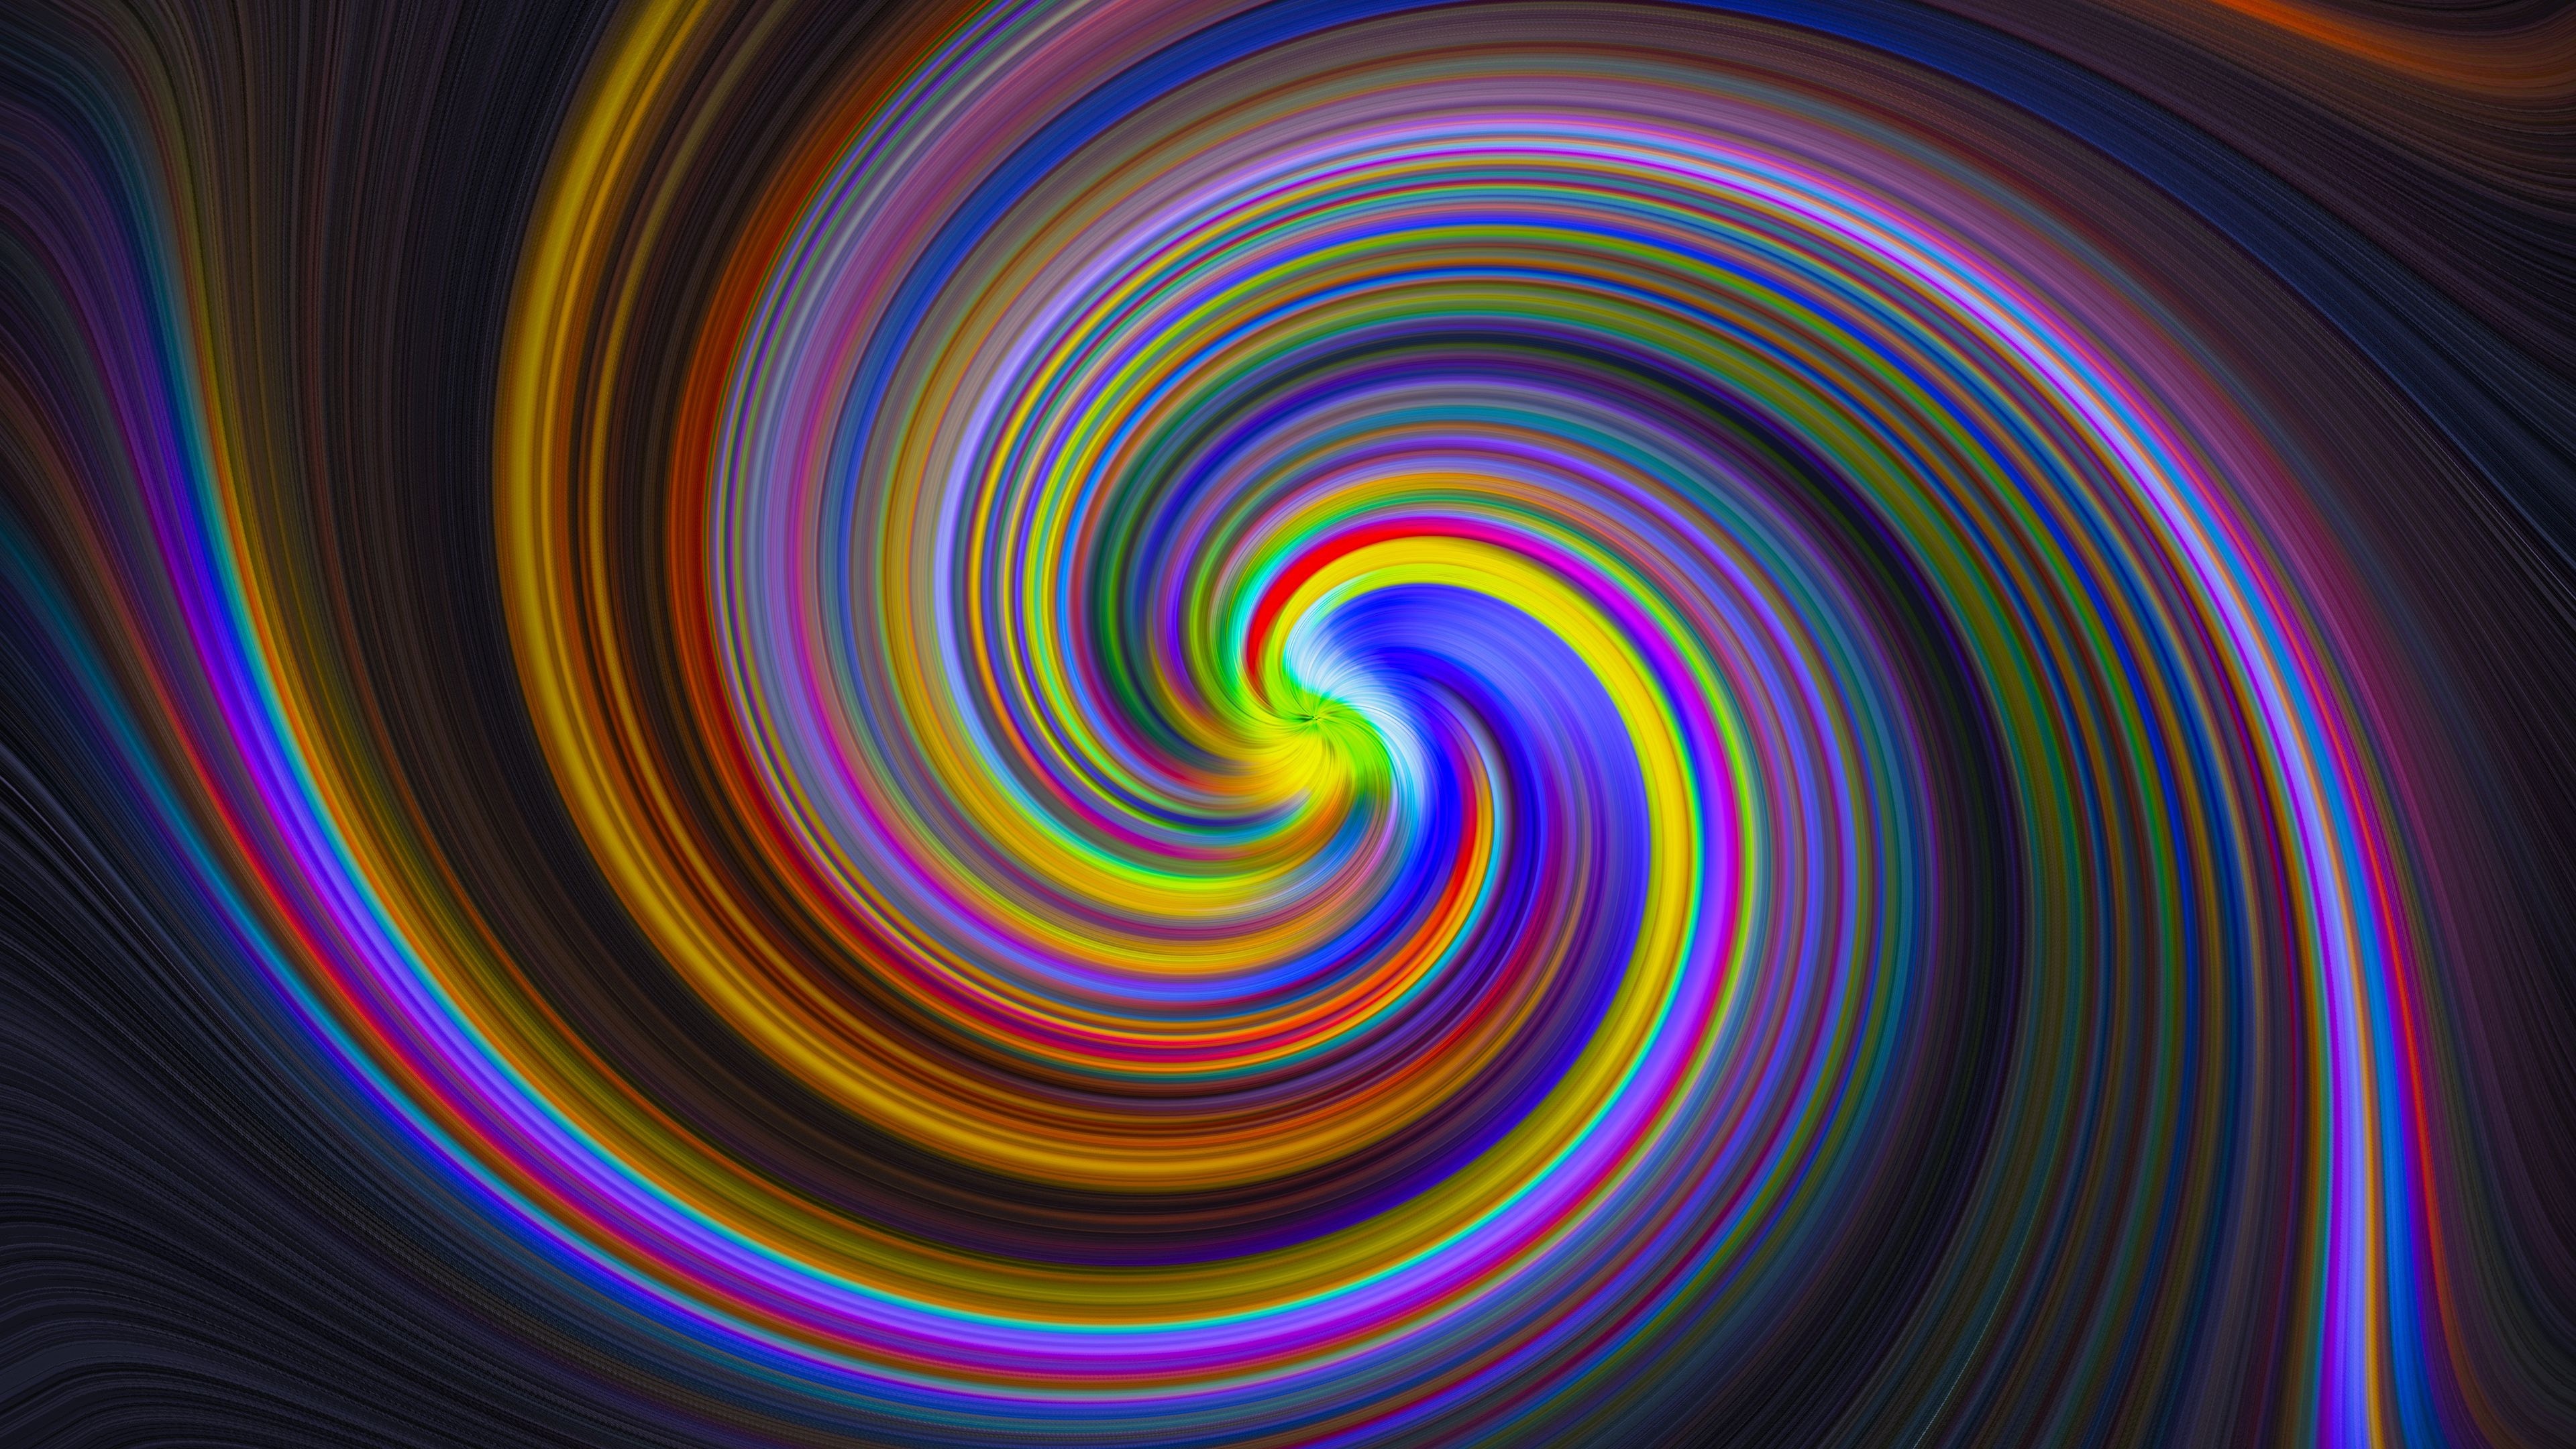 Swirling color abstraction